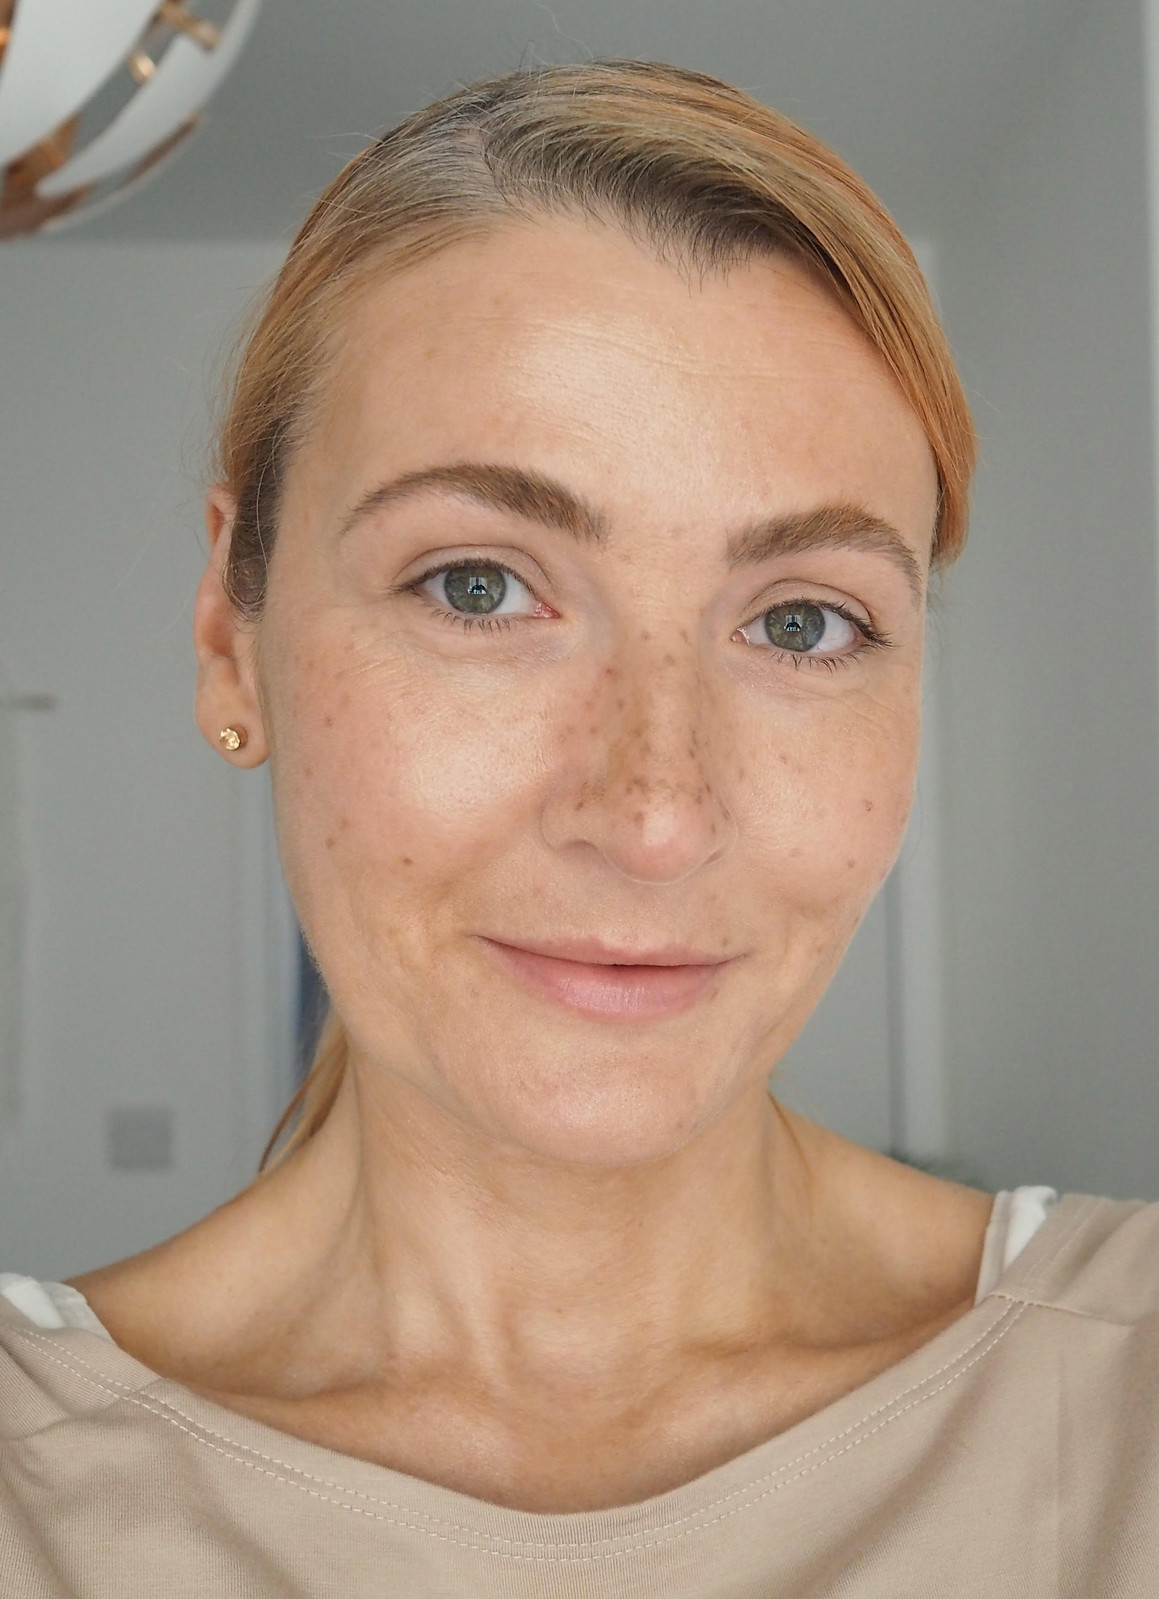 Over 40 Skincare: The Two Makeup Products I Use to Get Glowing Skin | Not Dressed As Lamb, Over 40 Fashion and Beauty Blog